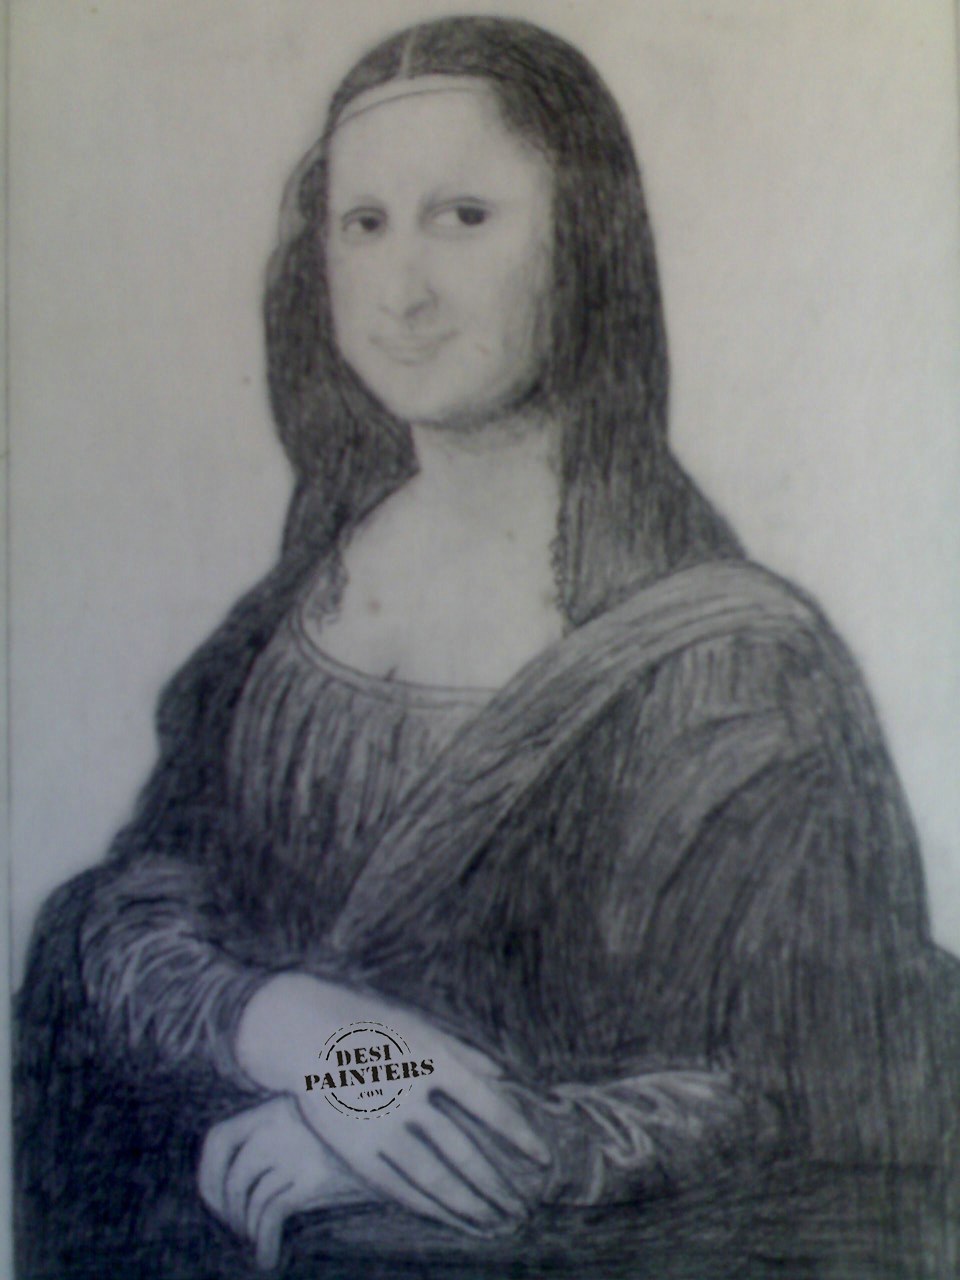 High-Res Image Scan Detects Hidden Drawing Under The 'Mona Lisa'